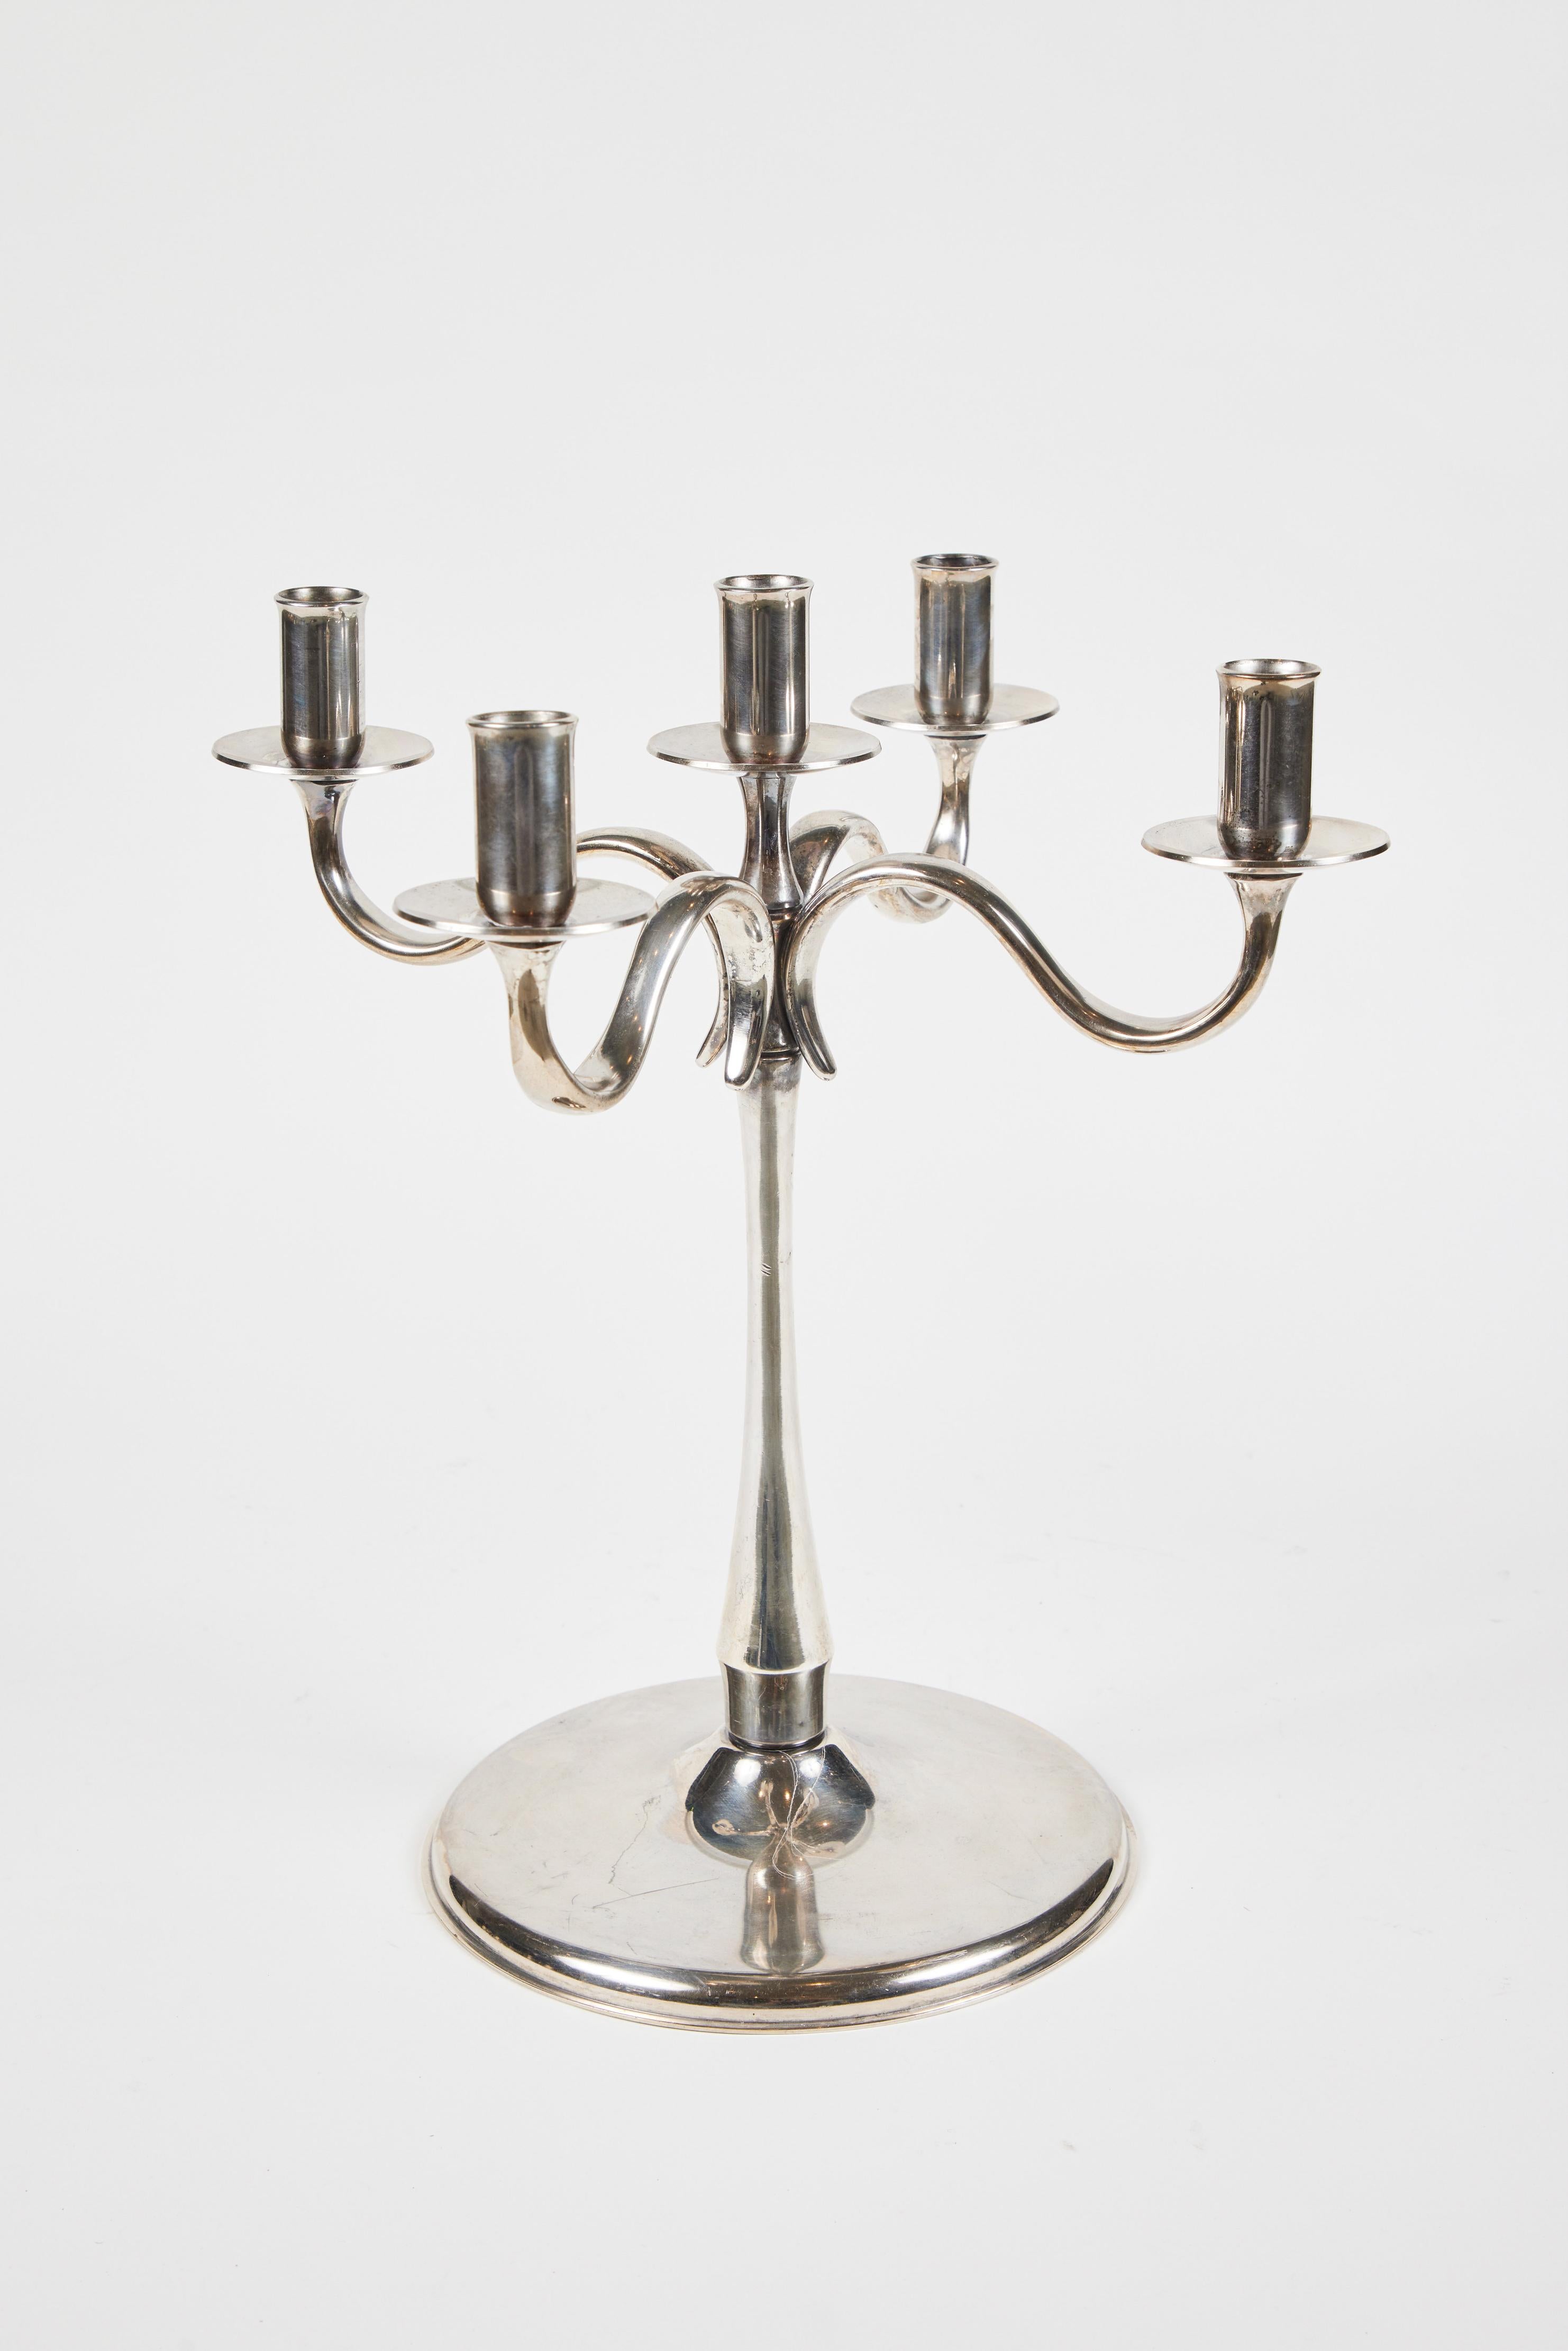 Vintage classic silver plate 5-arm candelabra with drip catchers from Italy.